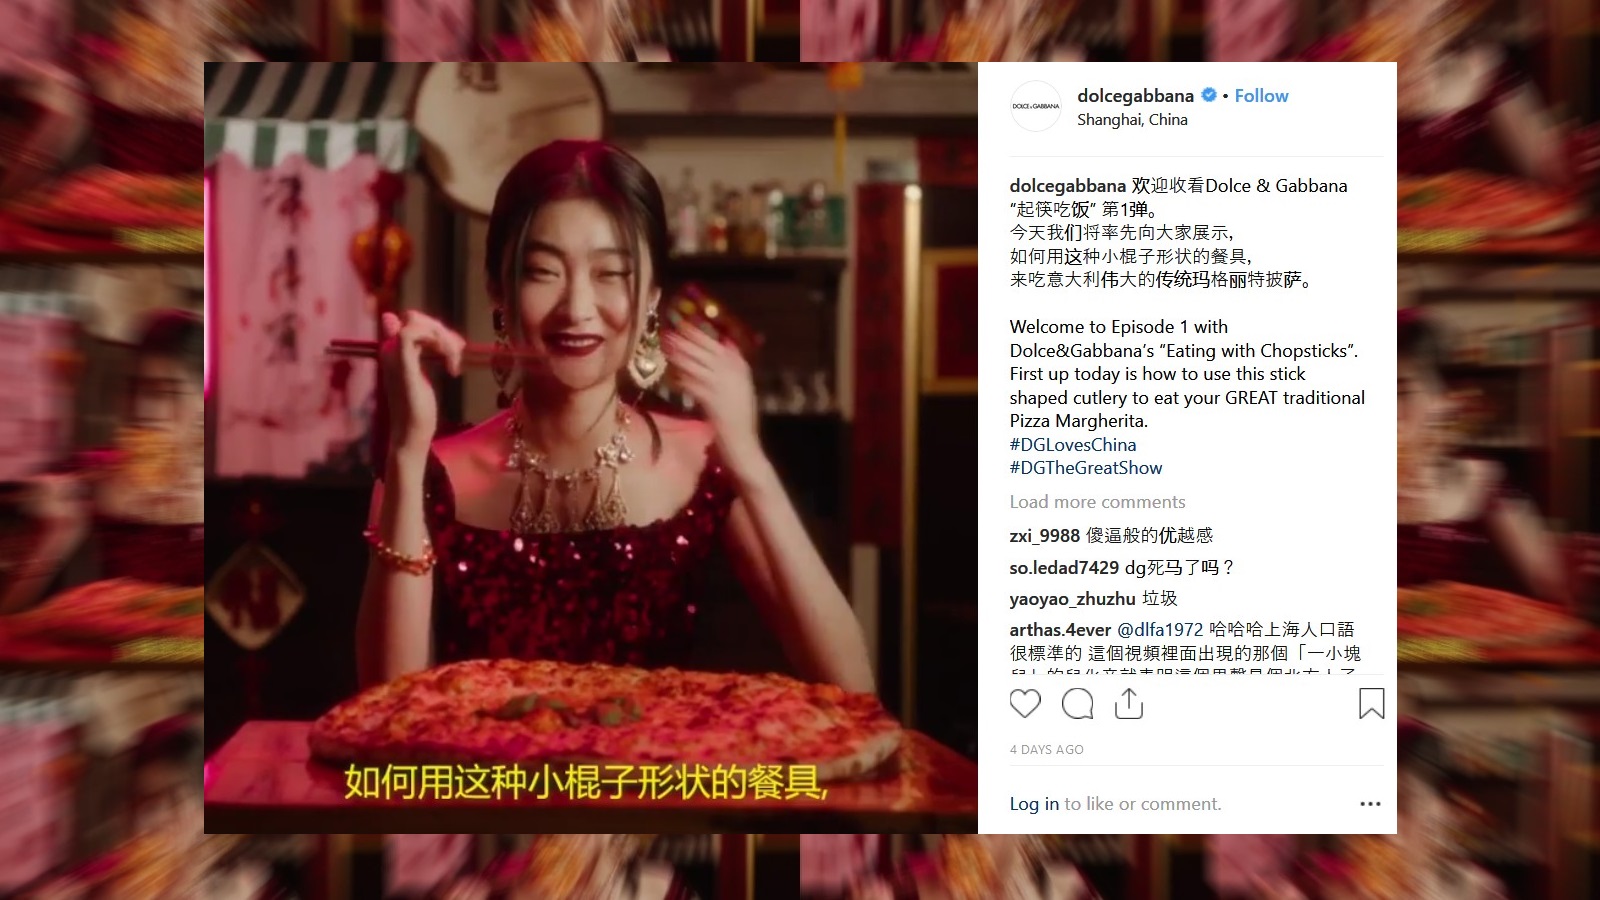 Dolce & Gabbana offends China, then claims Instagram was hacked